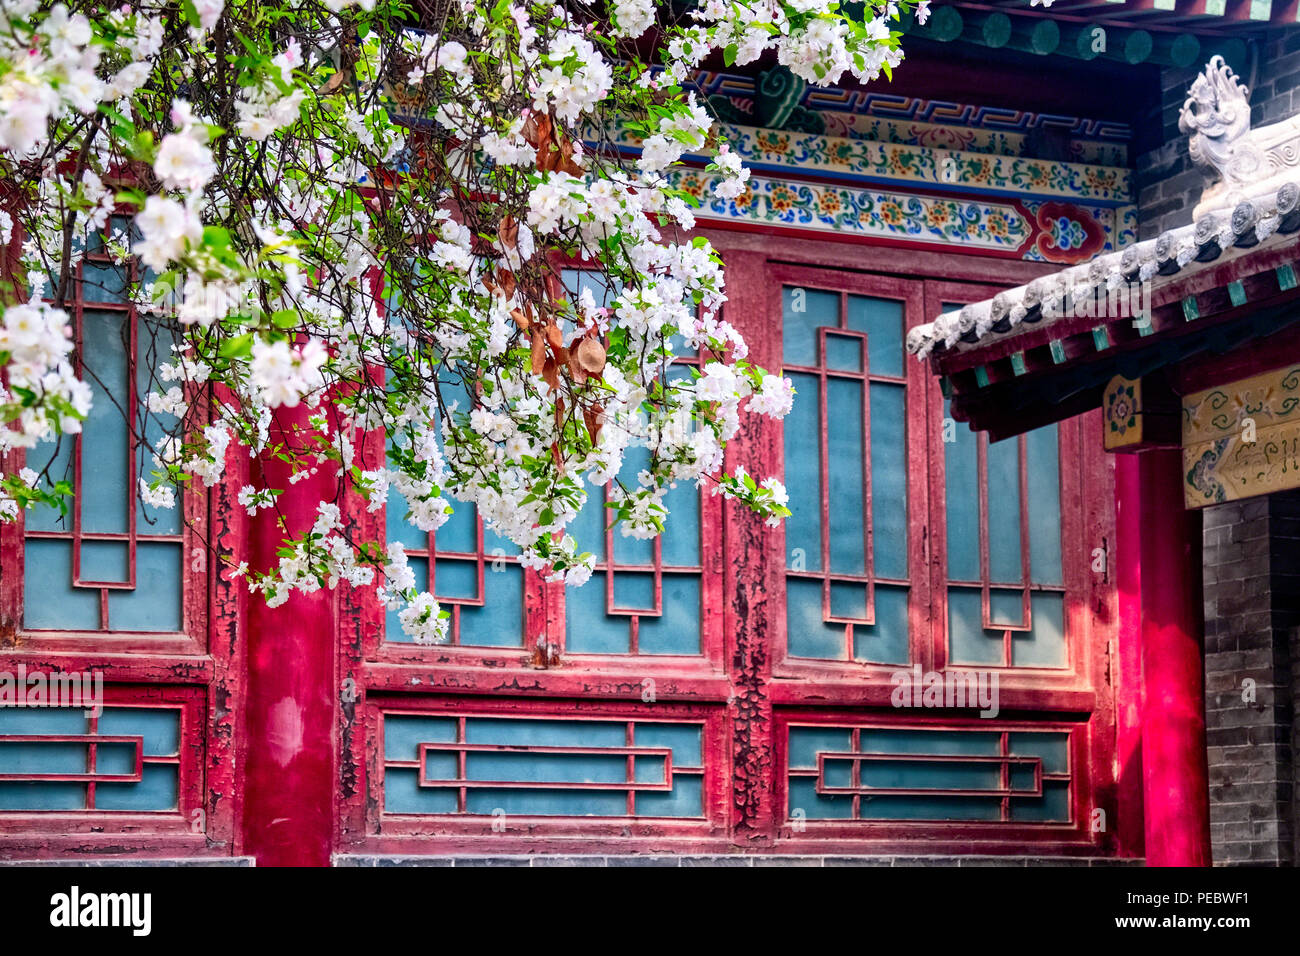 Blooming Tree in front of a Historic Building,  Forest of the Stone Steles, Beilin, Shian, Shaanxi Province, China Stock Photo